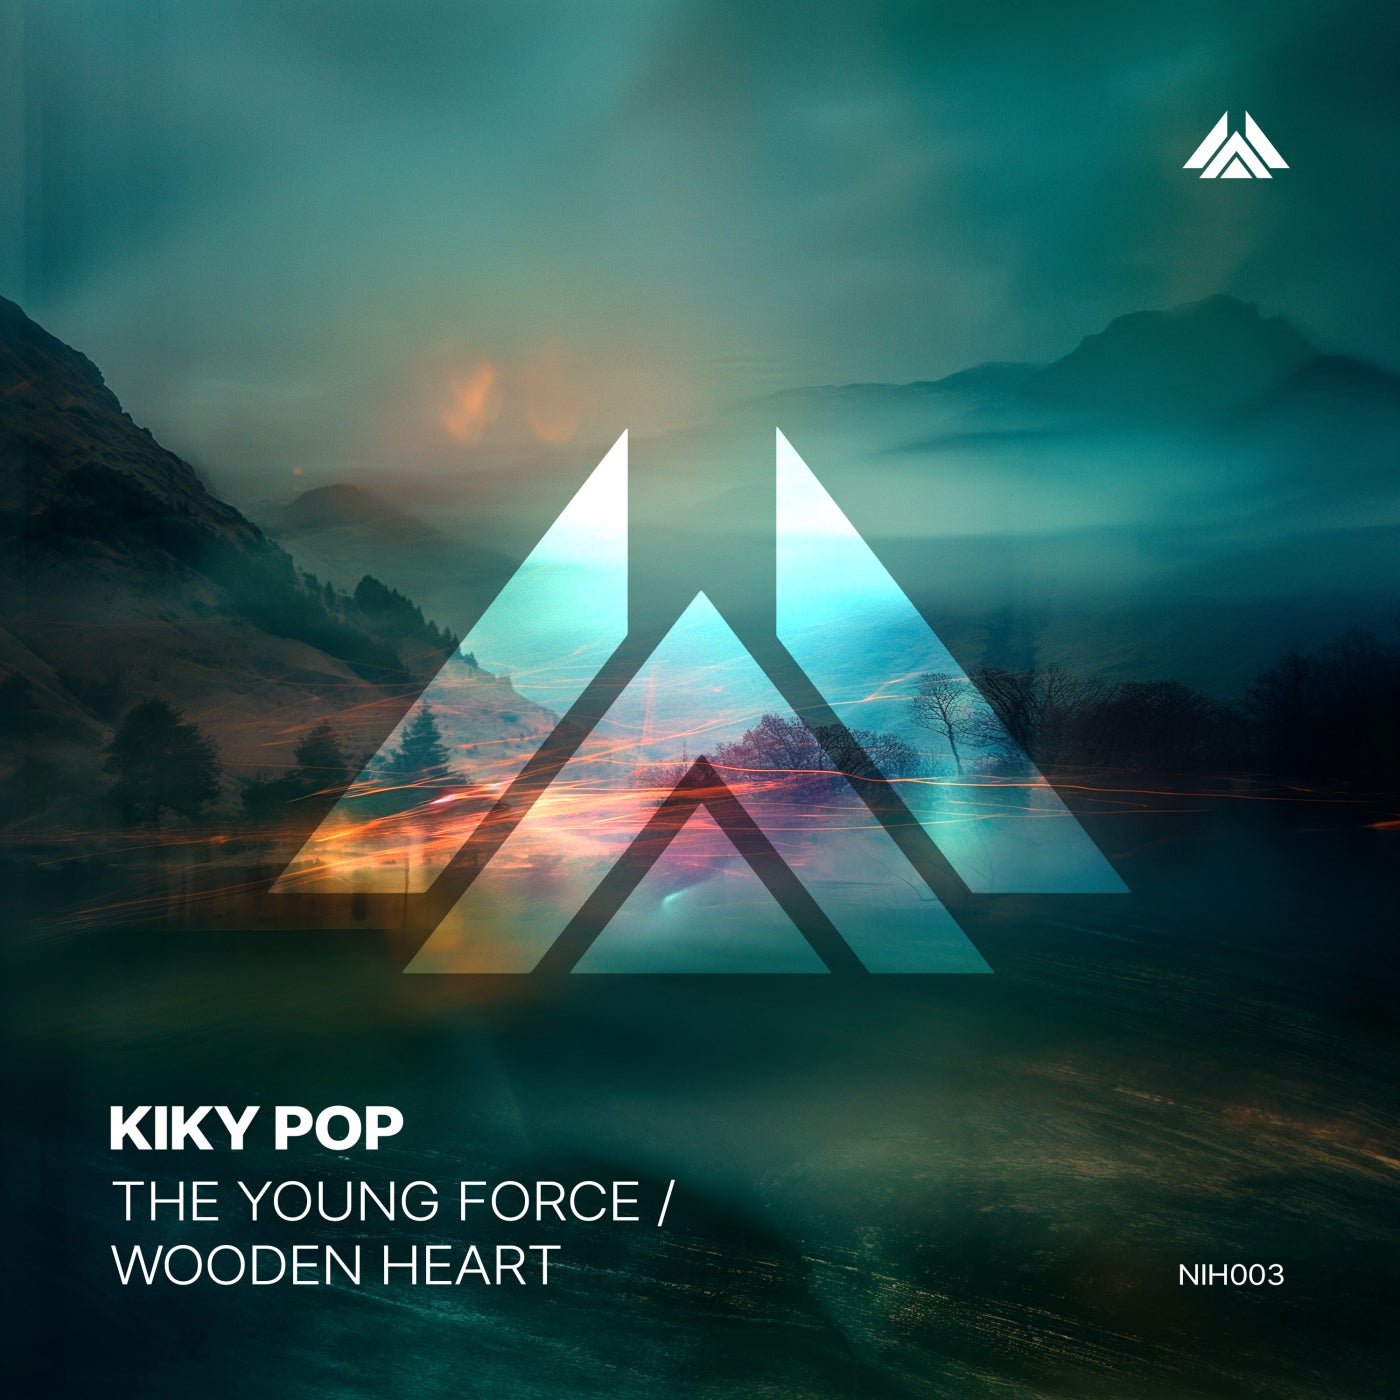 The Young Force / Wooden Heart